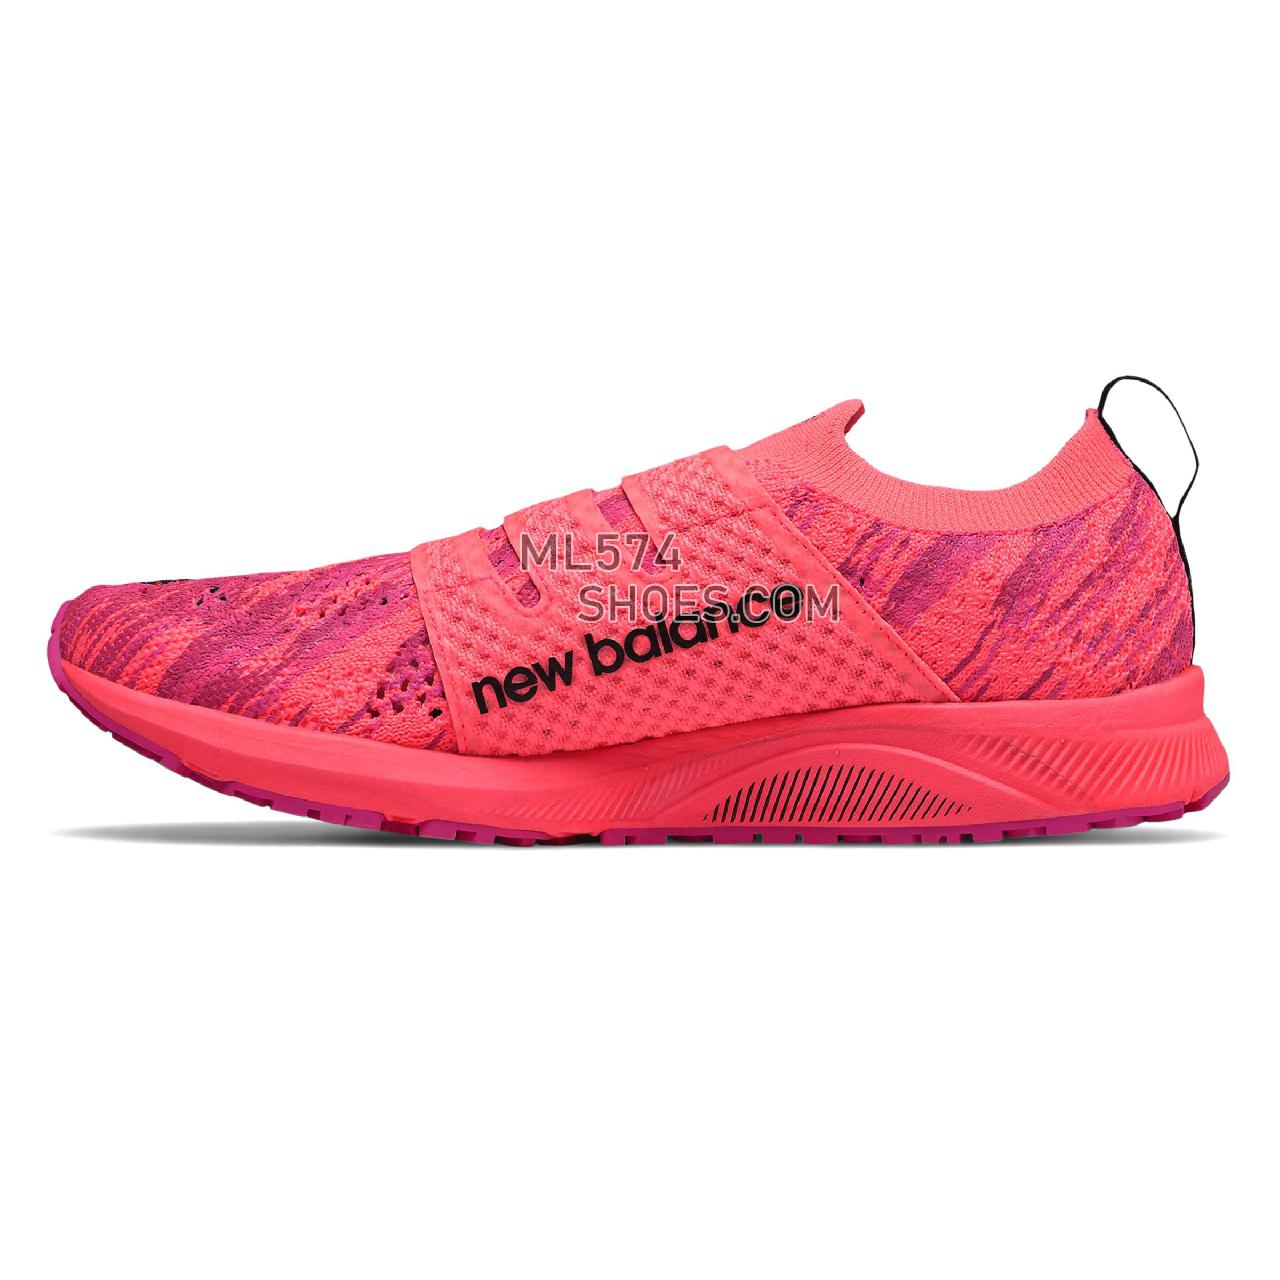 New Balance 1500T2 Boa - Women's Track Spikes And Cross Country - Guava with Peony and Black - W1500TB2